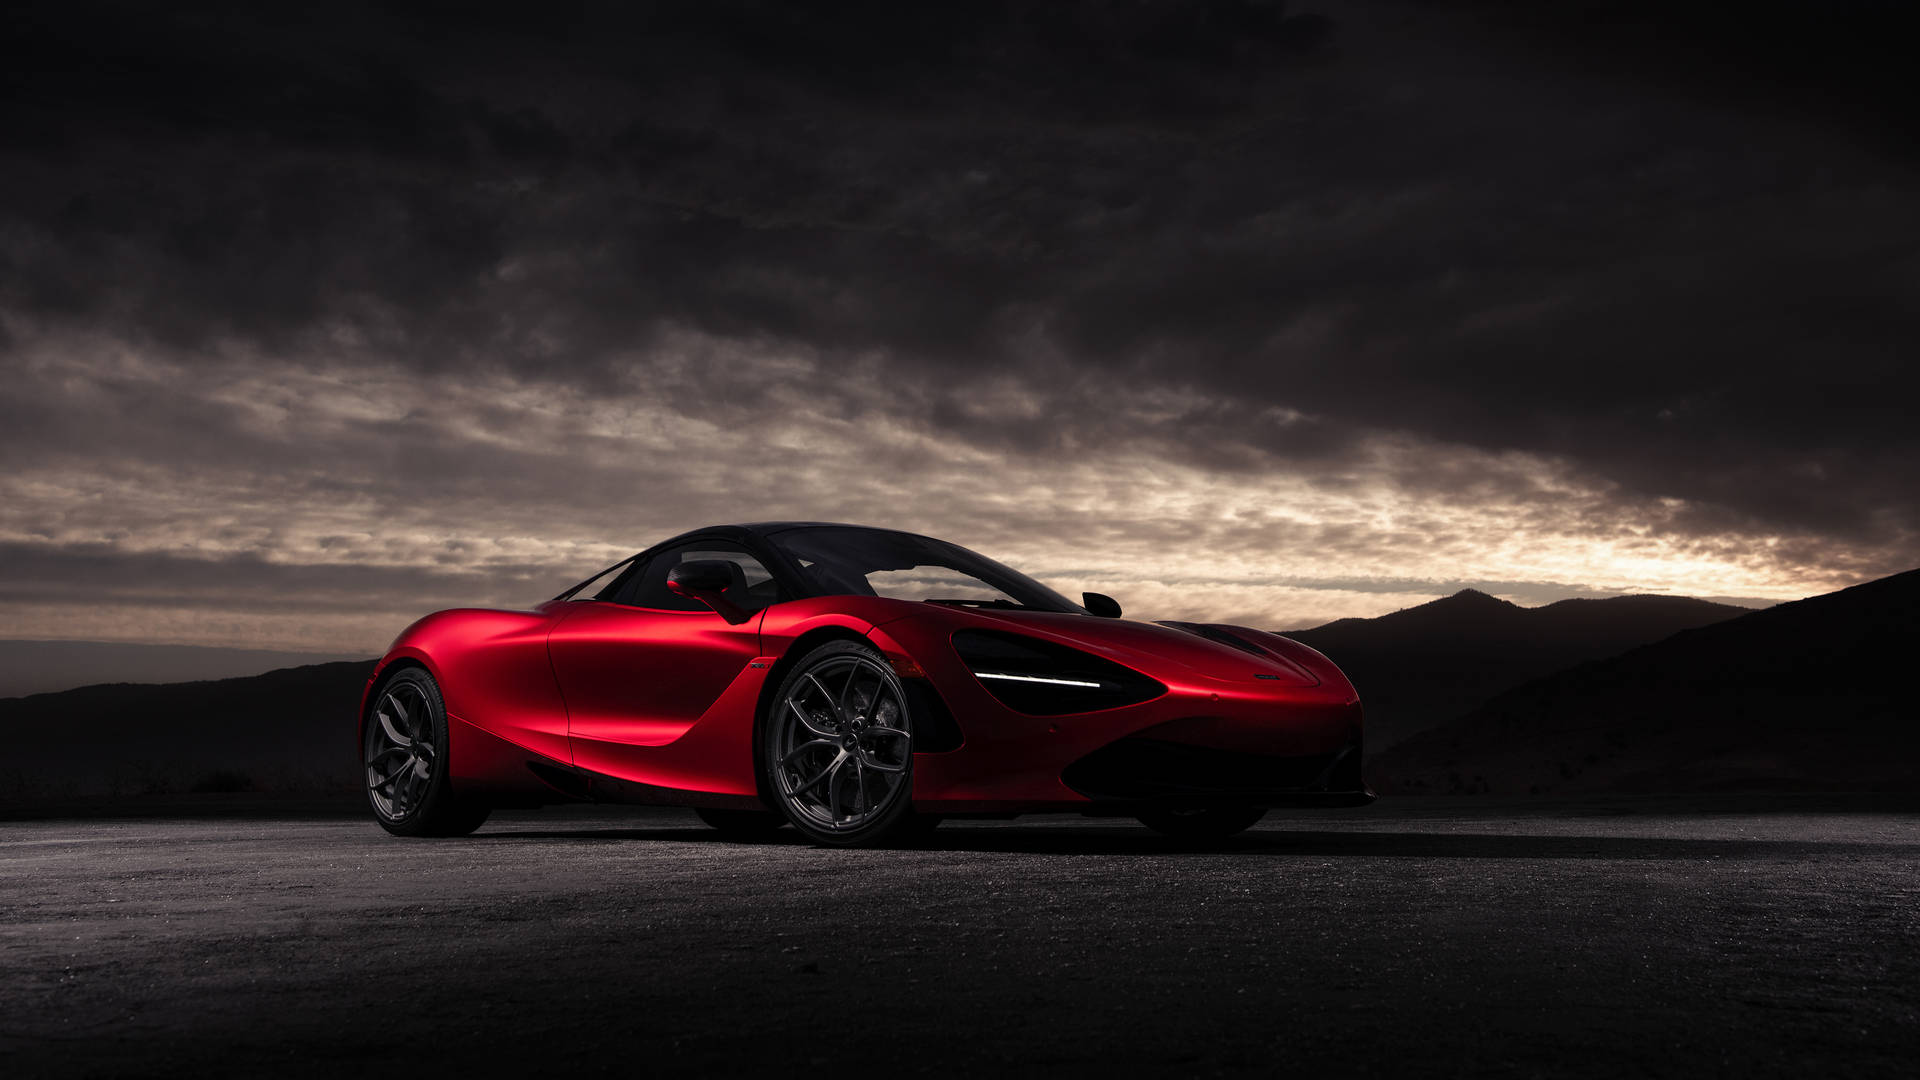 Majestic Red Mclaren 720s Glowing In The Night